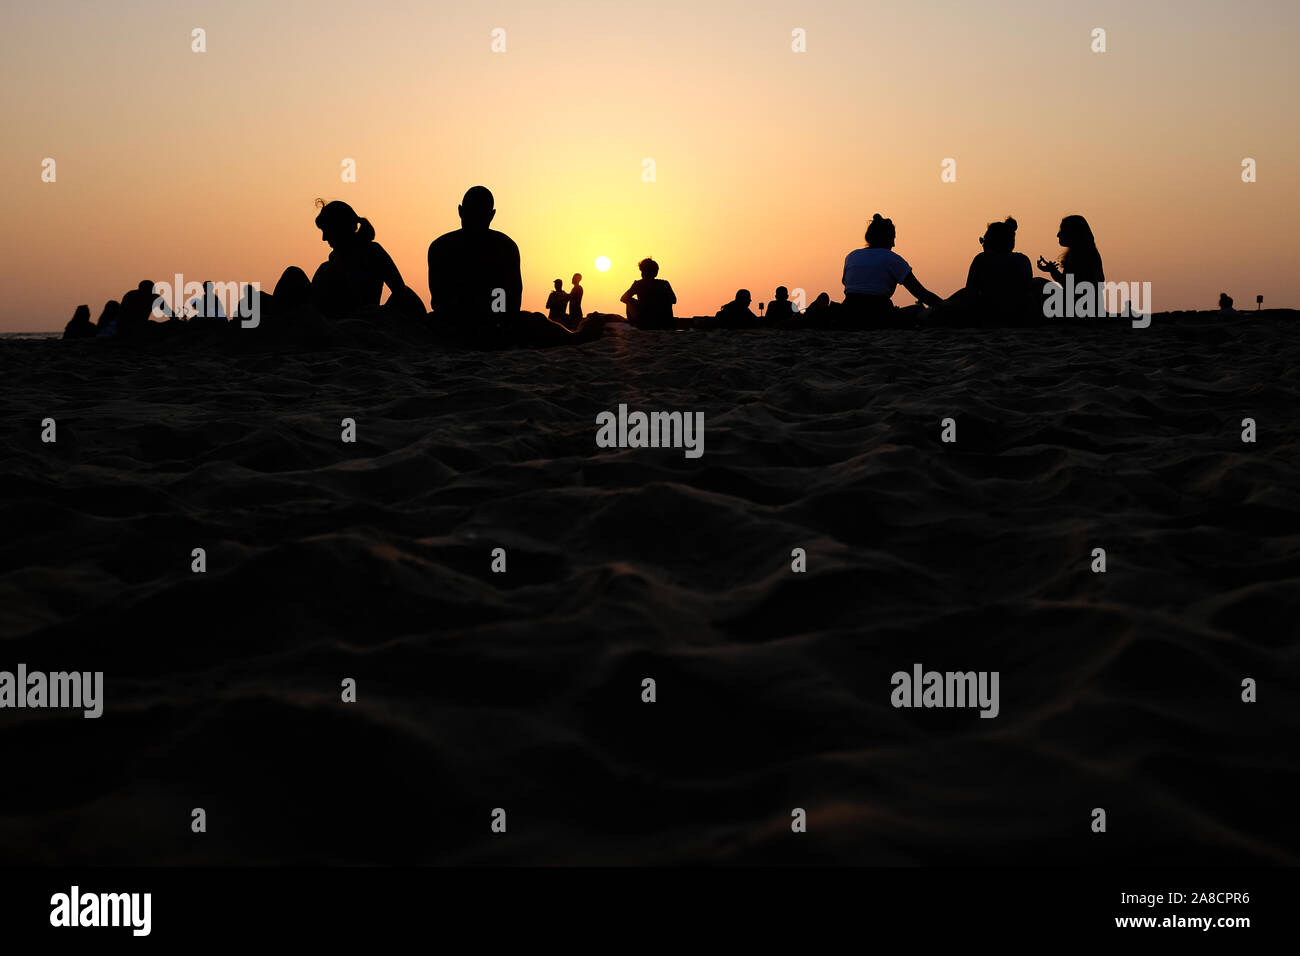 Silhouettes of people on beach at sunset Stock Photo